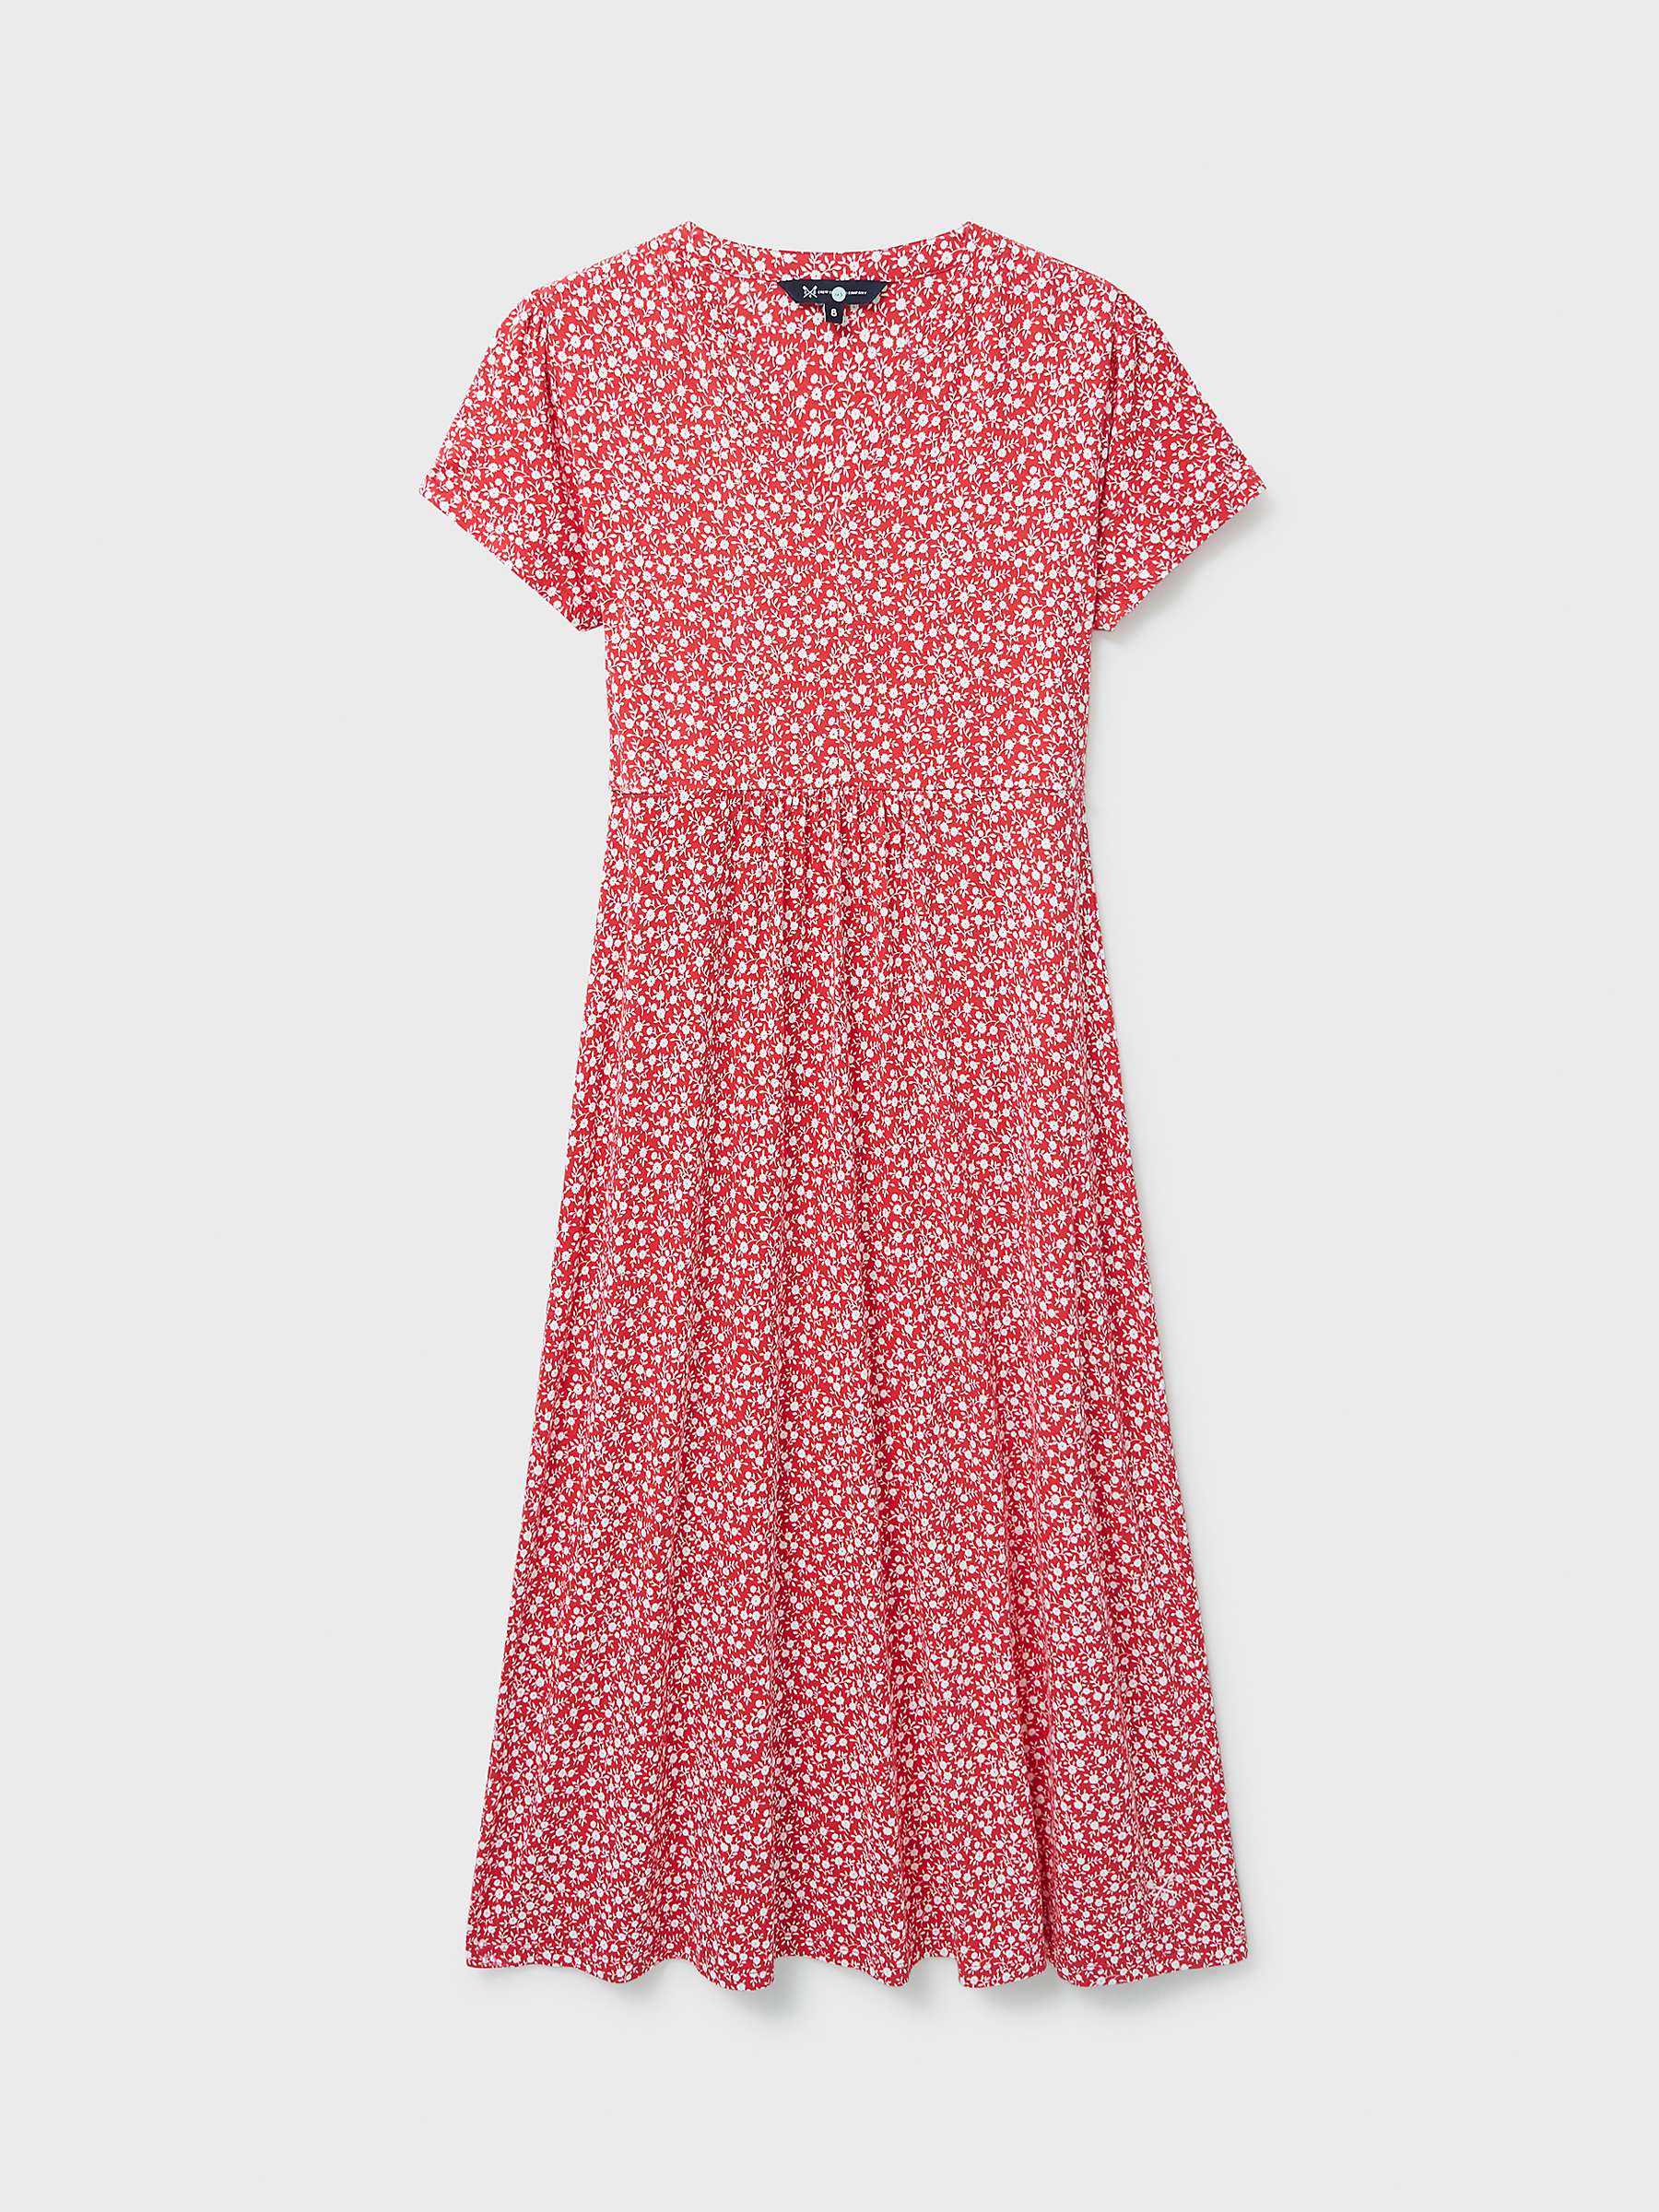 Buy Crew Clothing Emi Ditsy Floral Jersey Midi Dress, Red/Multi Online at johnlewis.com